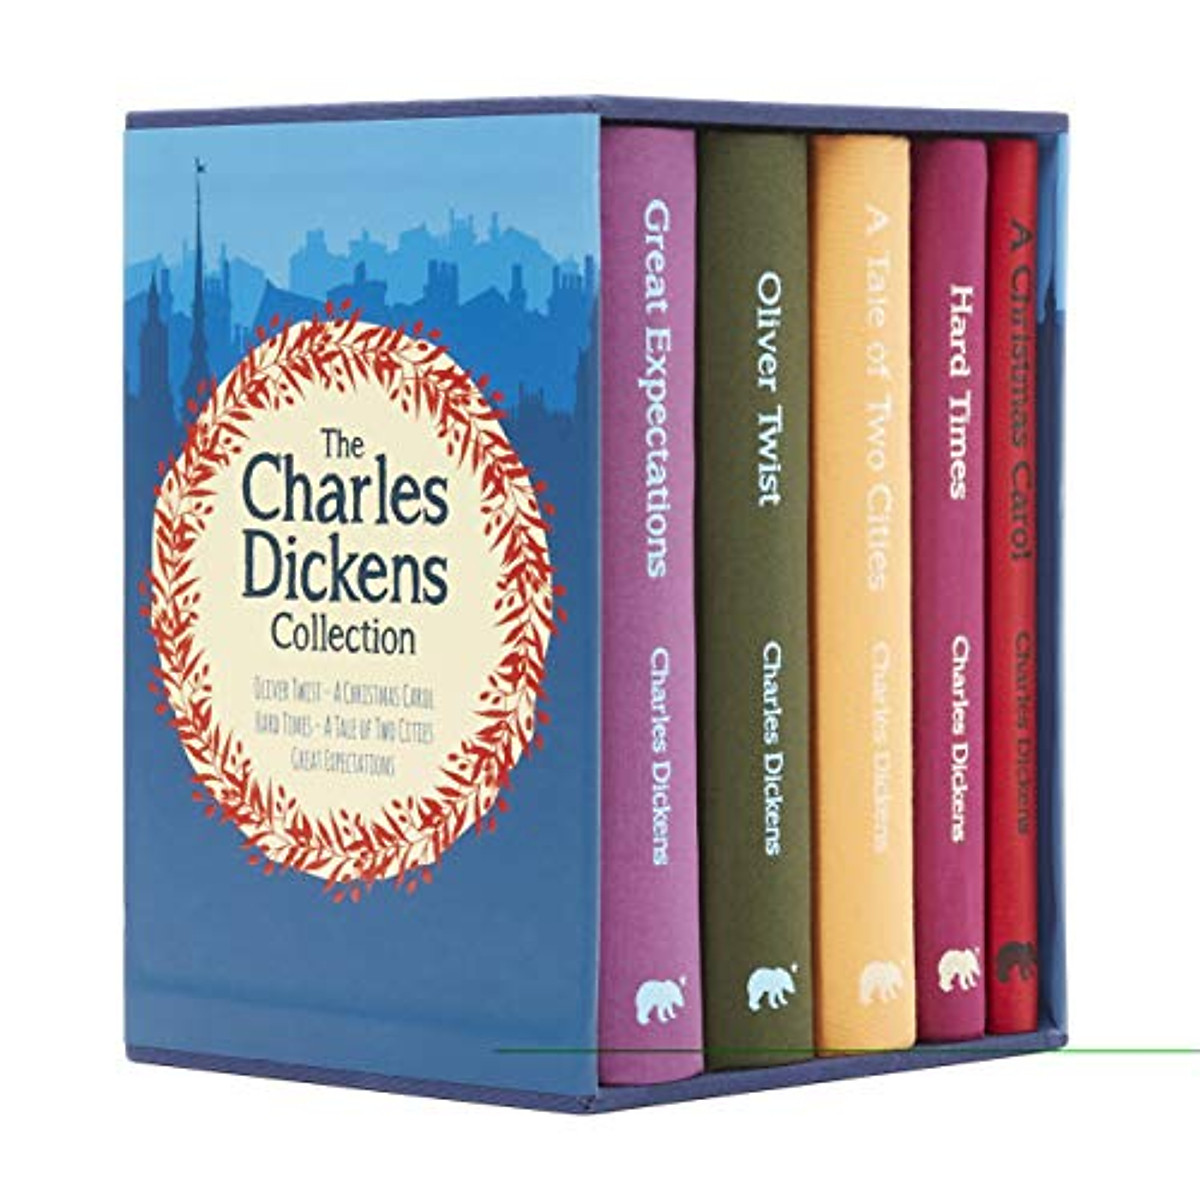 Truyện đọc tiếng Anh - The Charles Dickens Collection 